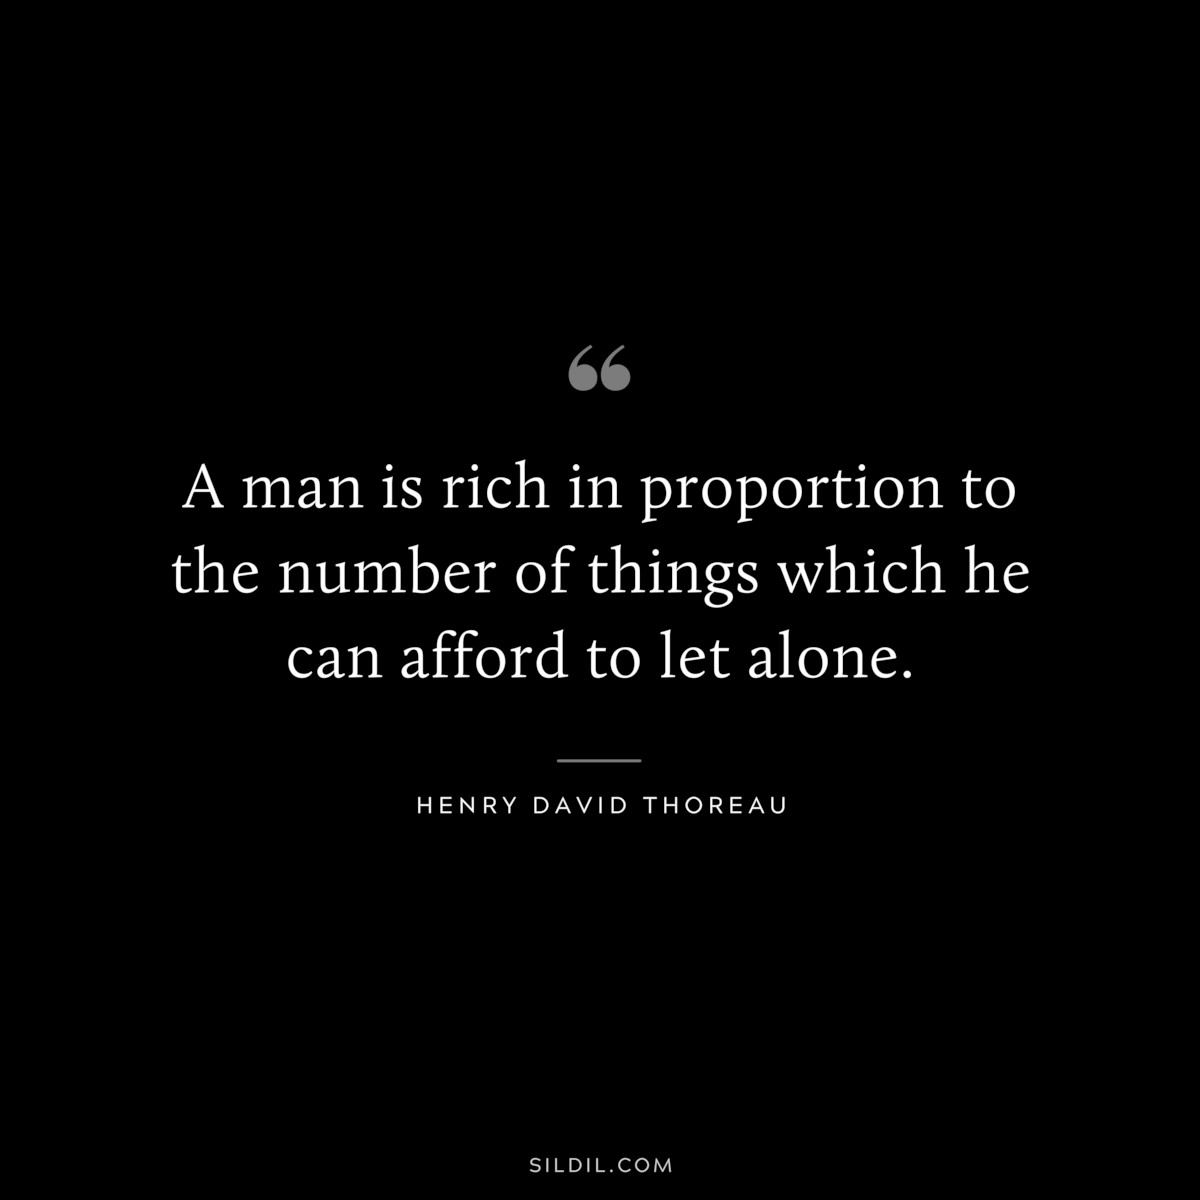 A man is rich in proportion to the number of things which he can afford to let alone. — Henry David Thoreau